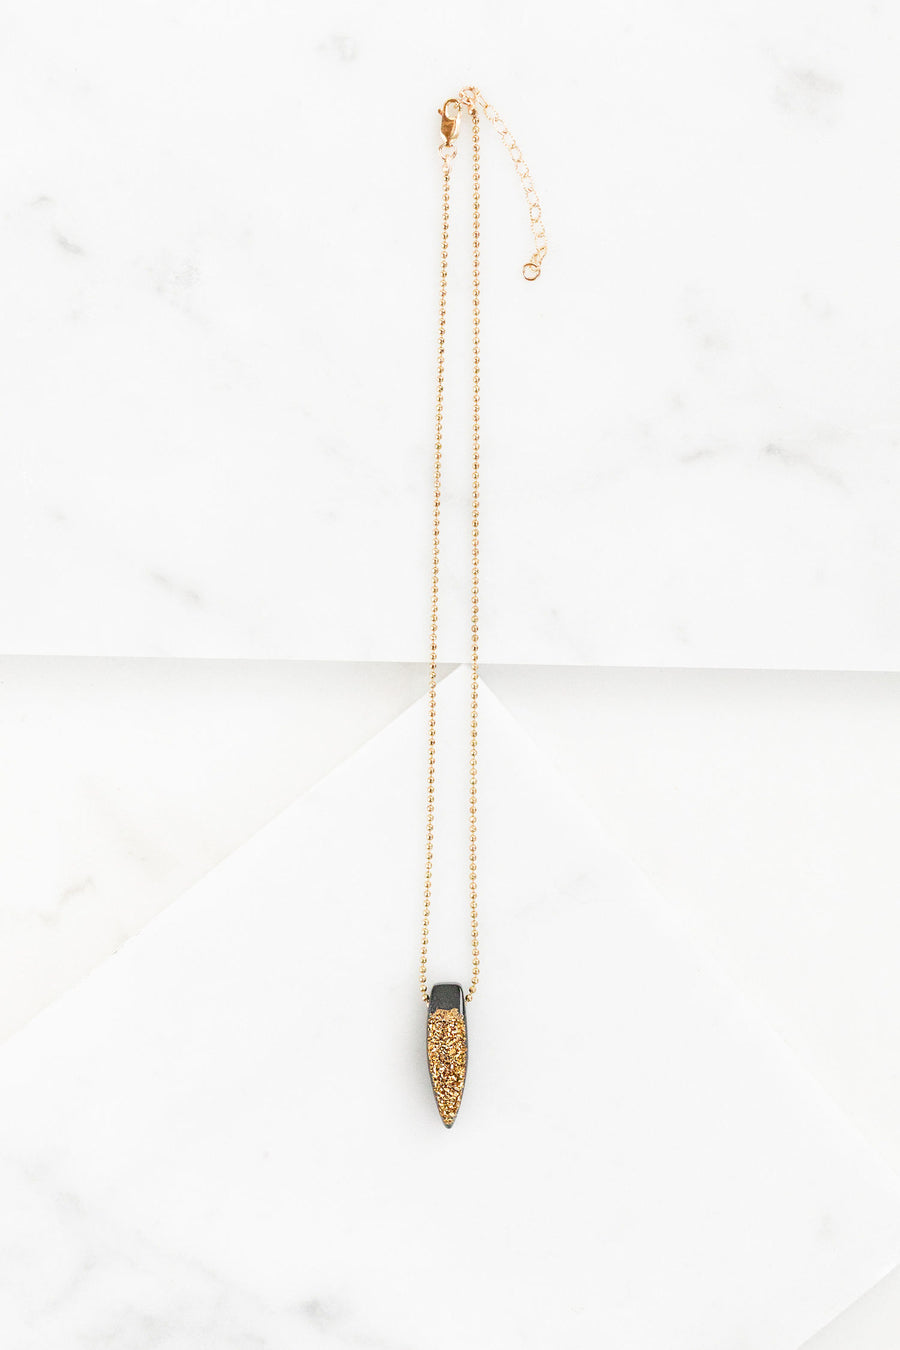 Find the perfect necklace you're looking for from Charme Silkiner! This beautiful 14K Gold Ball Chain Necklace with Ebony and Gold Druzy is perfection. Great for layering or wearing alone the Jonah Necklace is the perfect piece of unique jewelry that everyone should own.